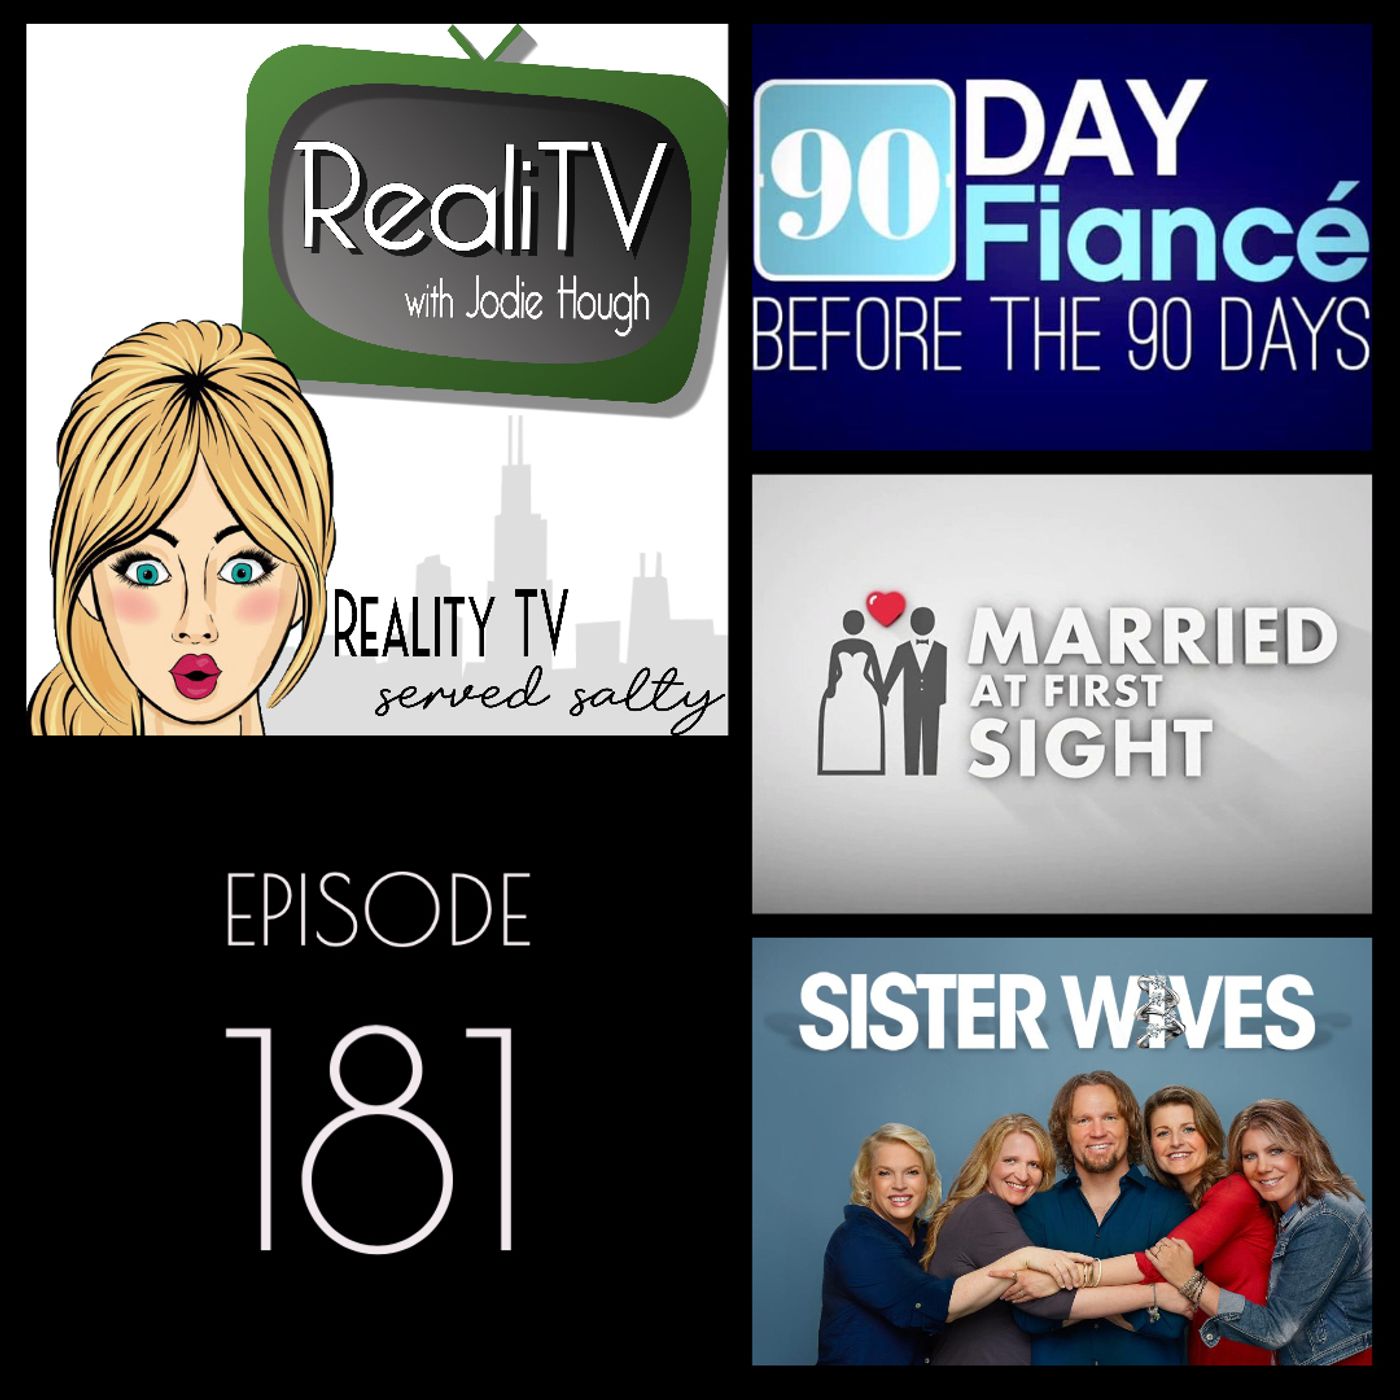 181: 90 Day Fiance, Married at First Sight & Sister Wives